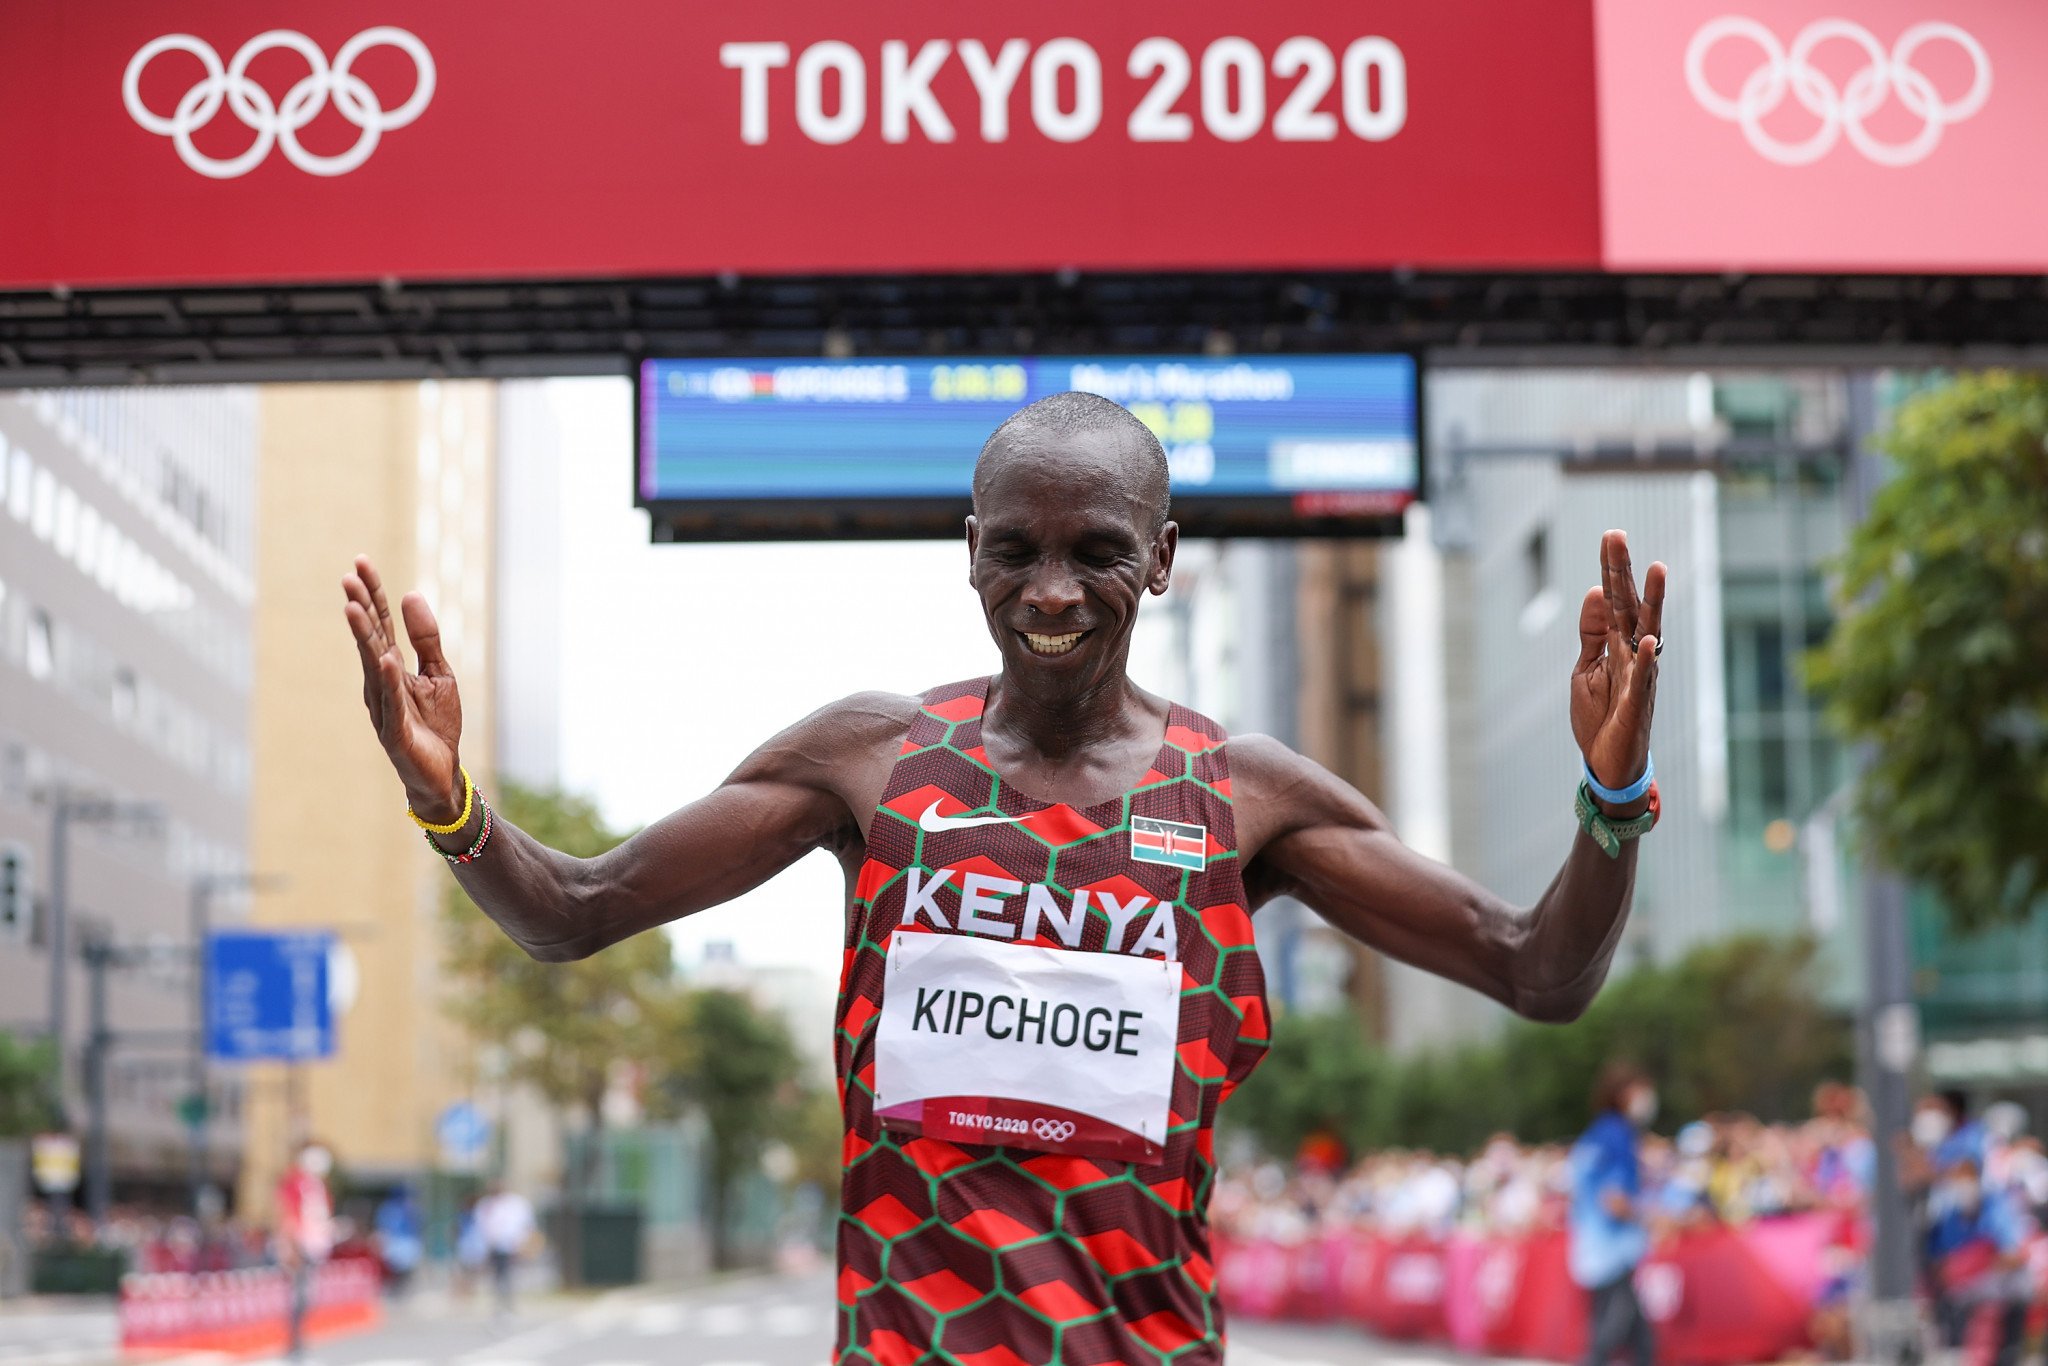 Eliud Kipchoge is hoping to win his third successive Olympic marathon title at Paris 2024 ©Getty Images